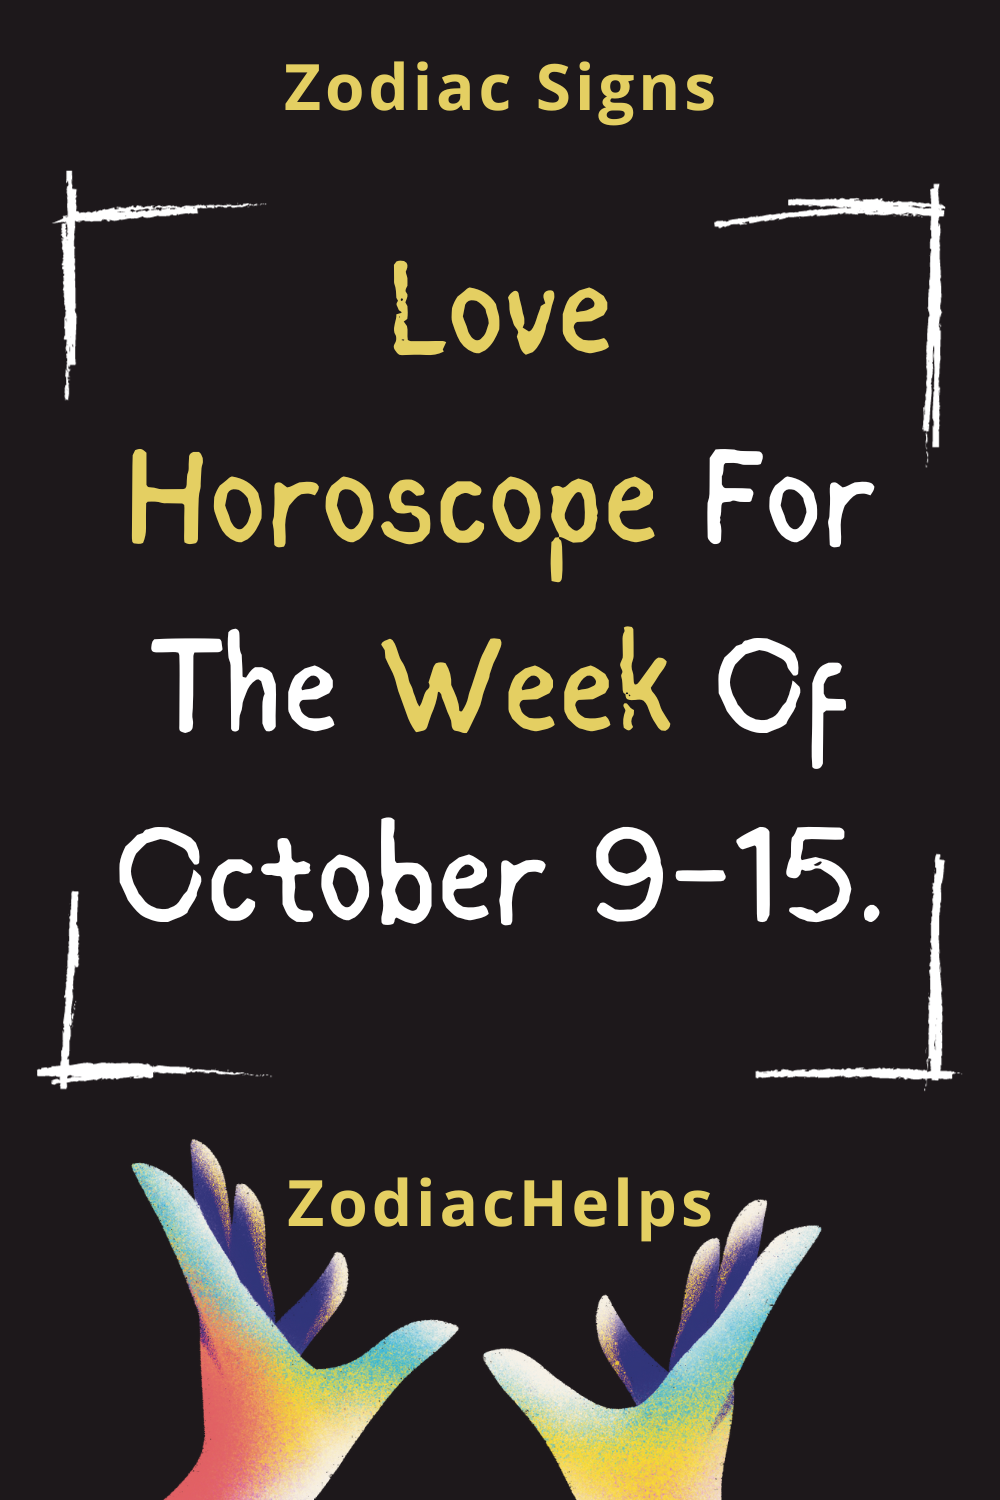 Love Horoscope For The Week Of October 9-15.